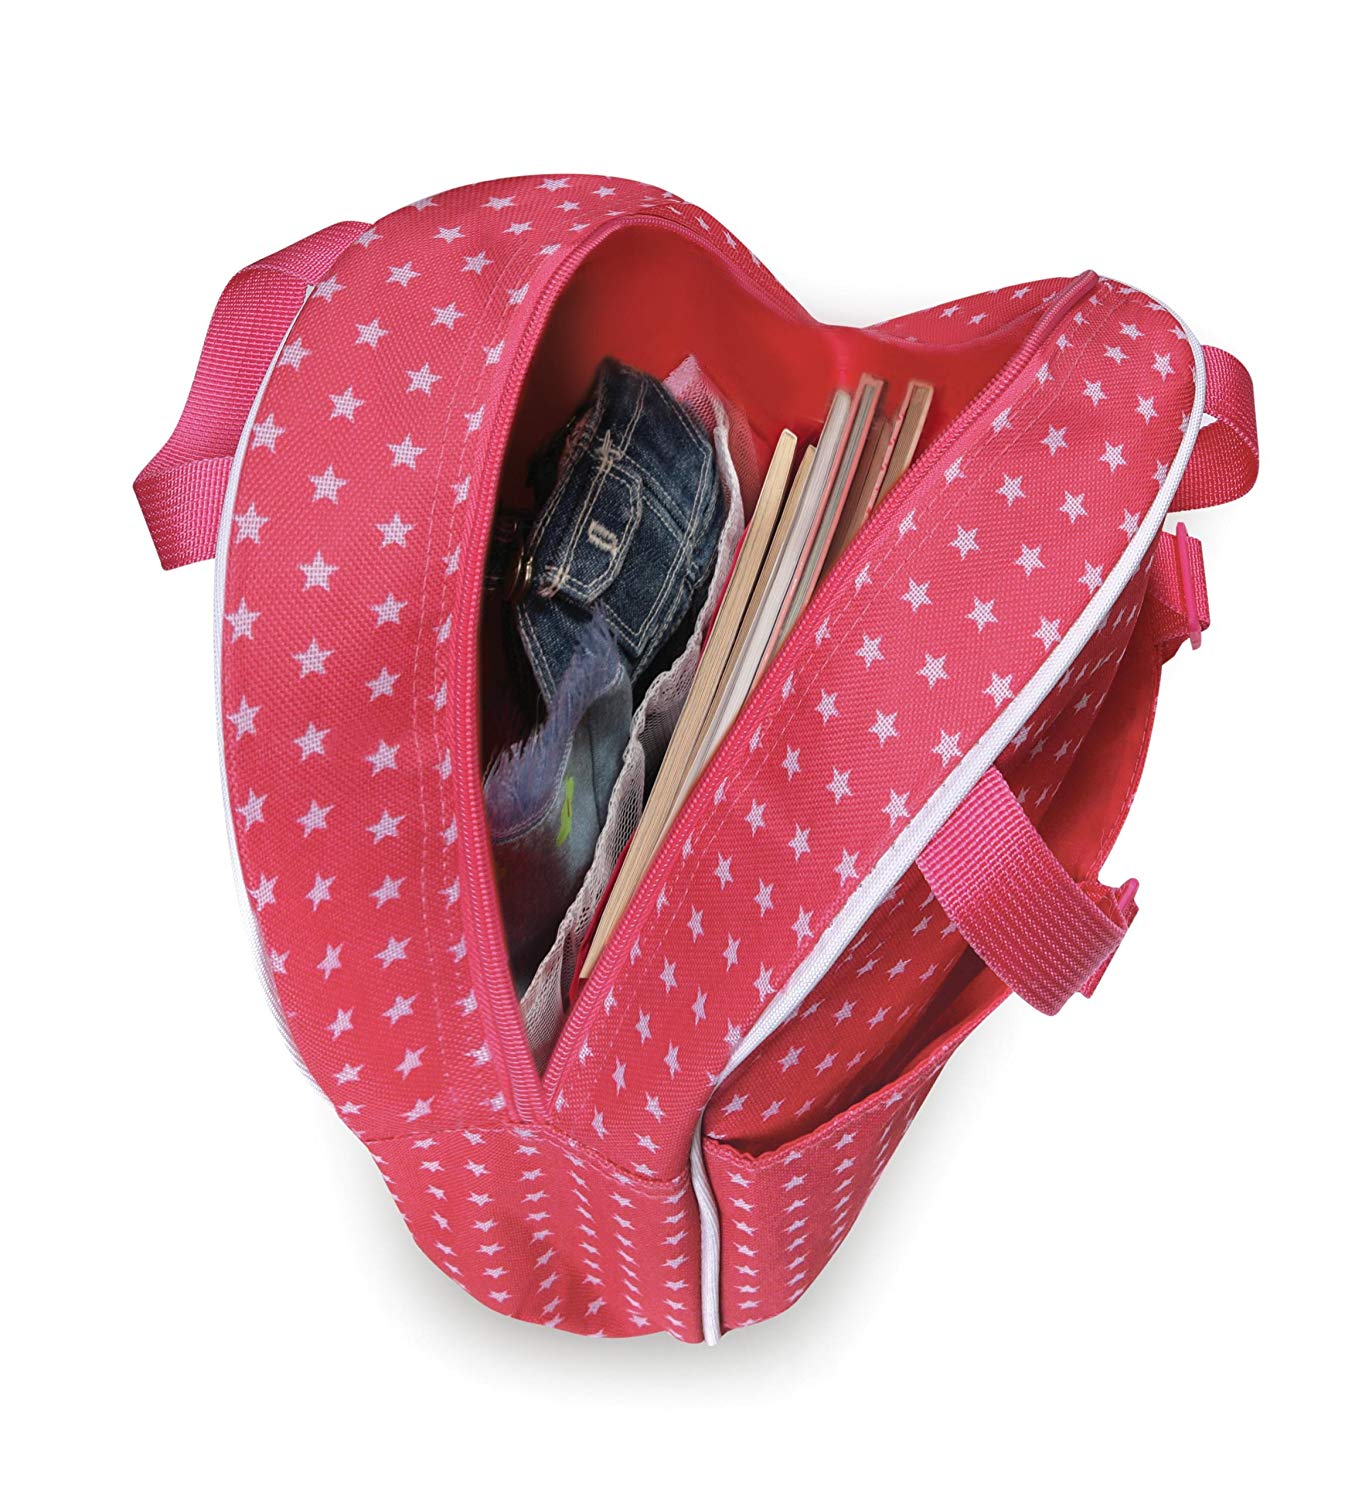 Badger Basket Doll Travel Backpack - Pink/Star - Fits American Girl, My Life As & Most 18 inch Dolls - image 5 of 6